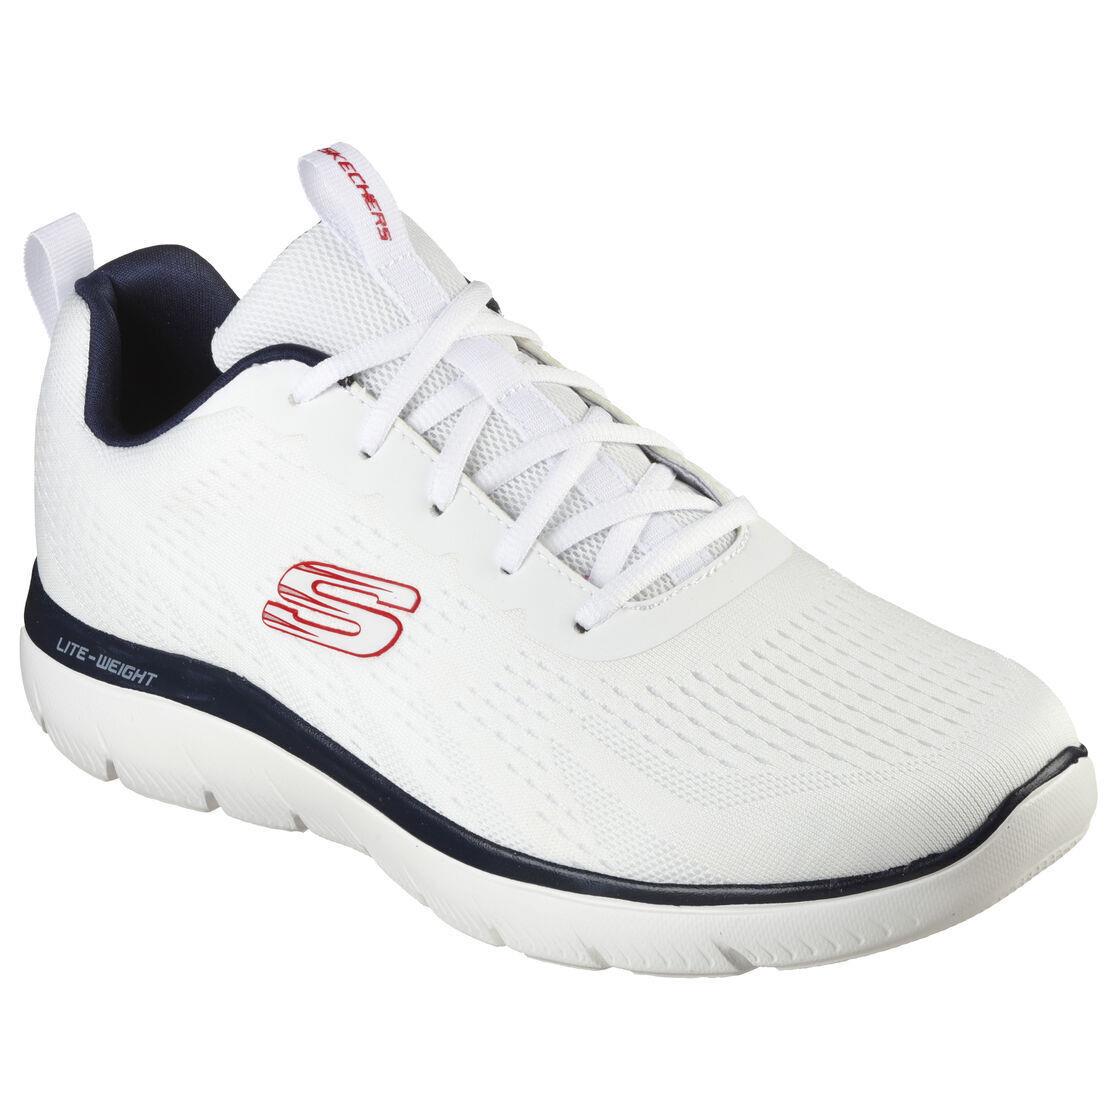 Man Skechers Summits Torre 232395 Lace-up Shoe Color White/navy